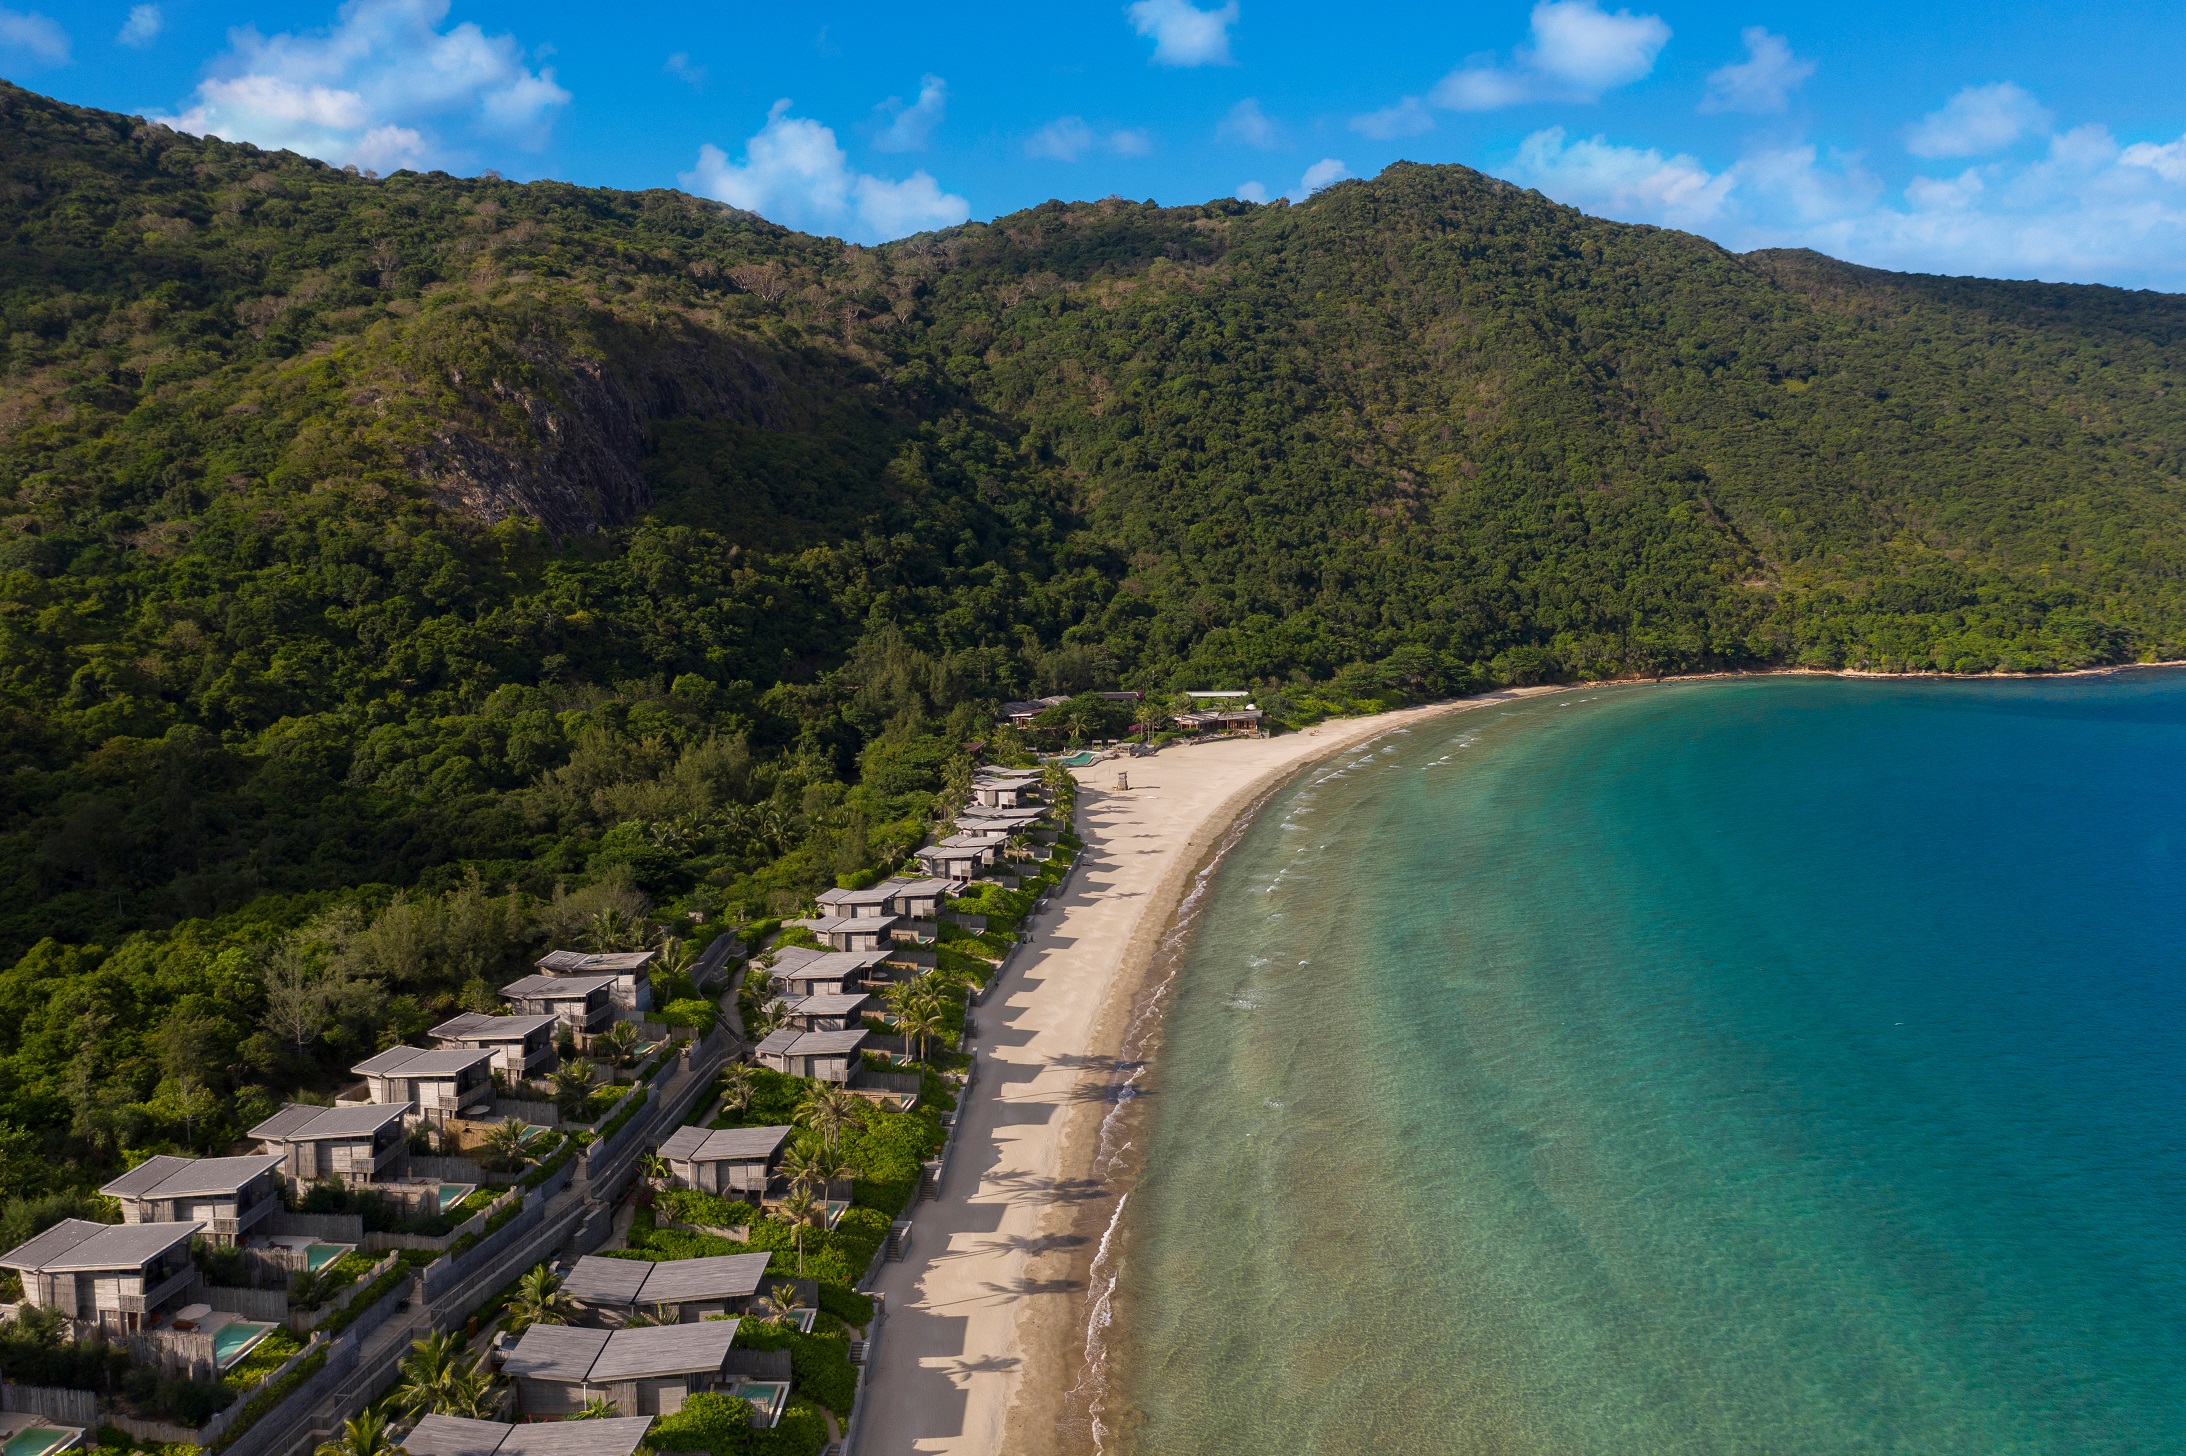 Six Senses Con Dao is the No. 1 Resort Hotel in Southeast Asia in this year’s edition of the Travel + Leisure World’s Best Awards